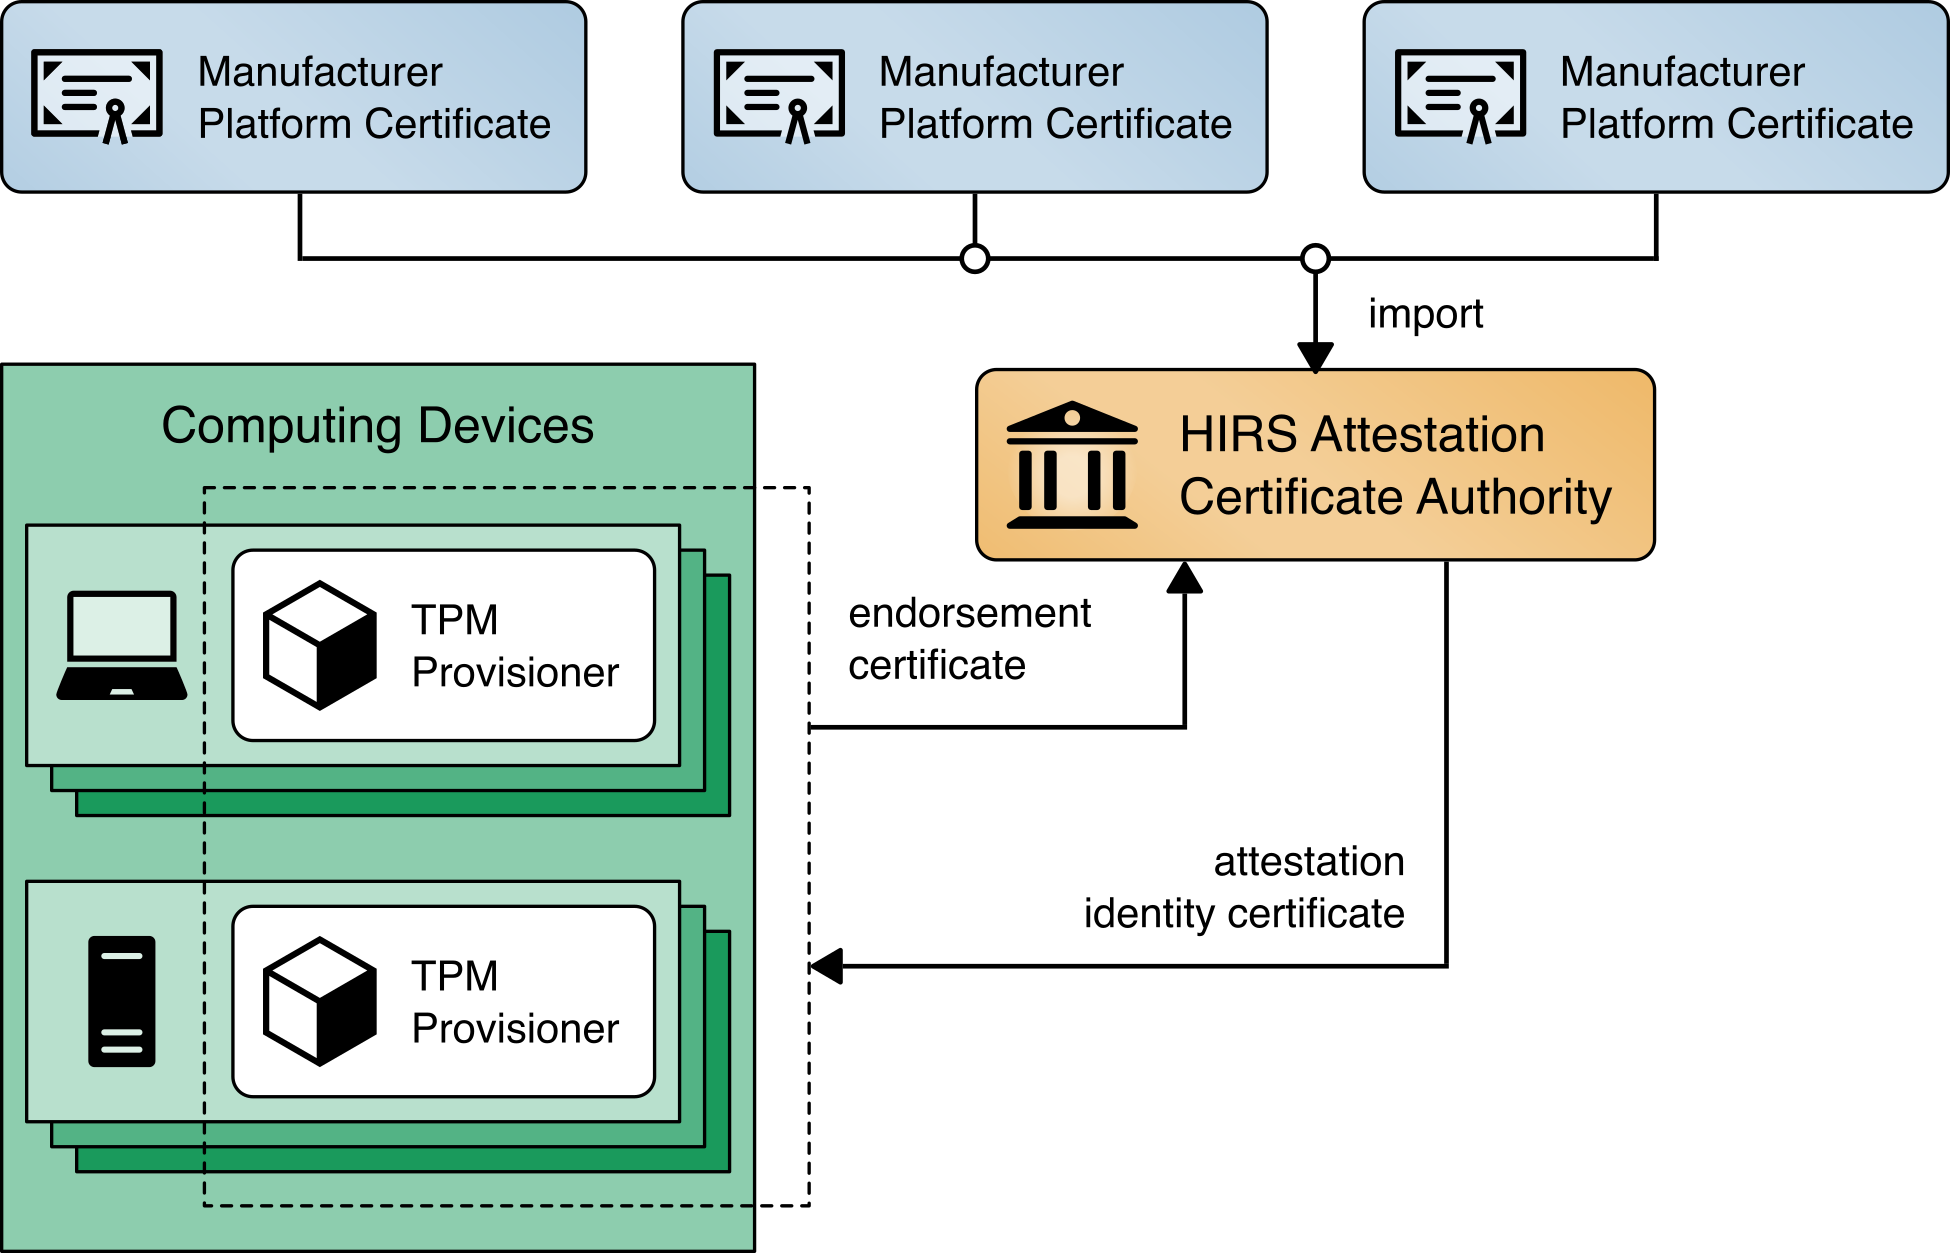 This figure shows how the HIRS system integrates with the prototype demonstration. It depicts the flows between the TPM provisioners and the HIRS Attestation Certificate Authority.